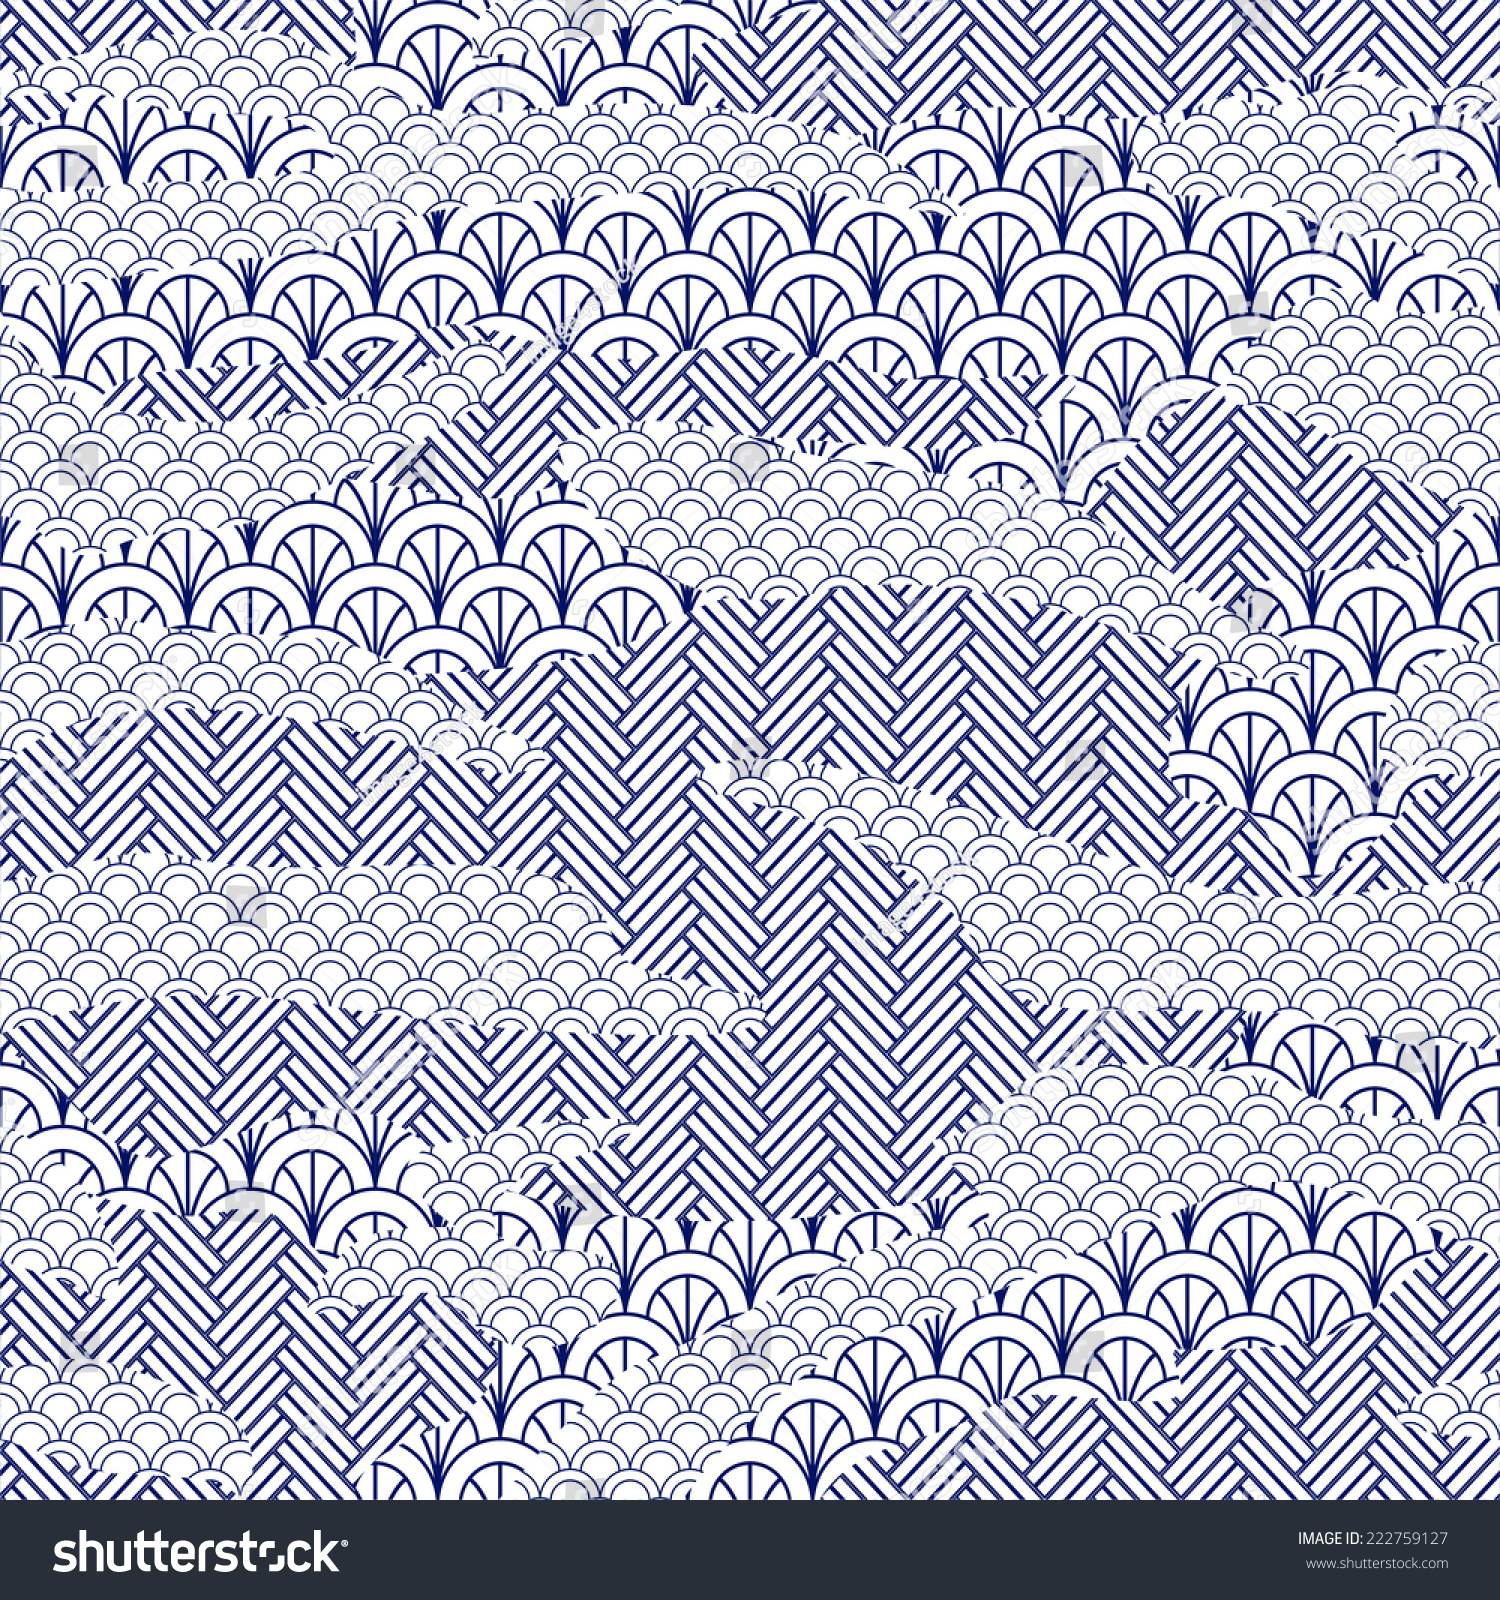 Camouflage Seamless Pattern Abstract Ornament Japan Stock Vector ...